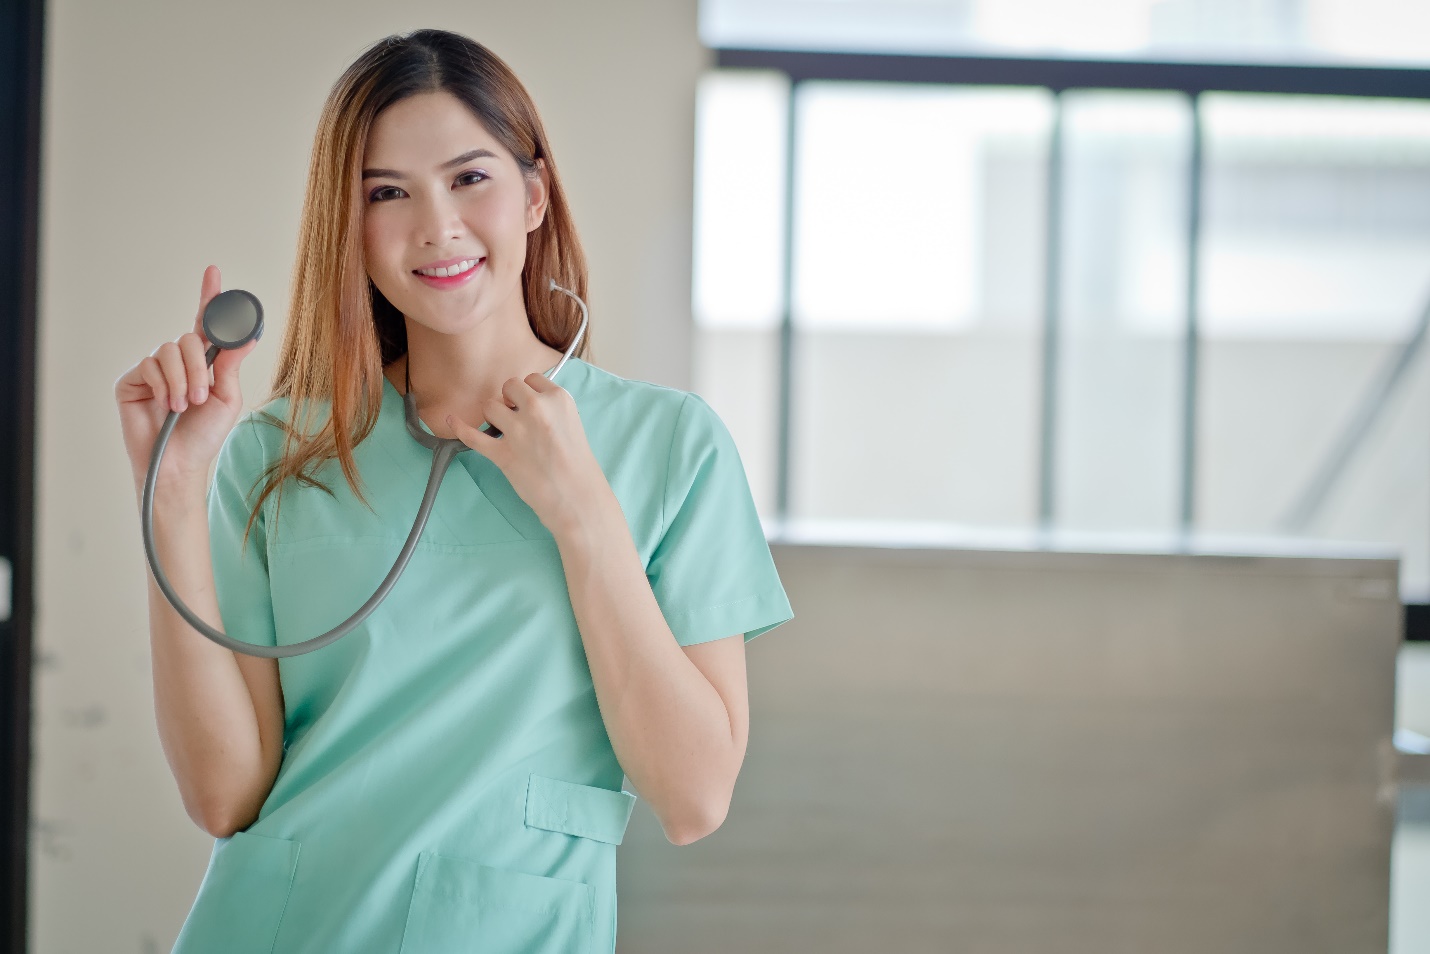 How Medical Training Can Help Other Aspects of Your Life